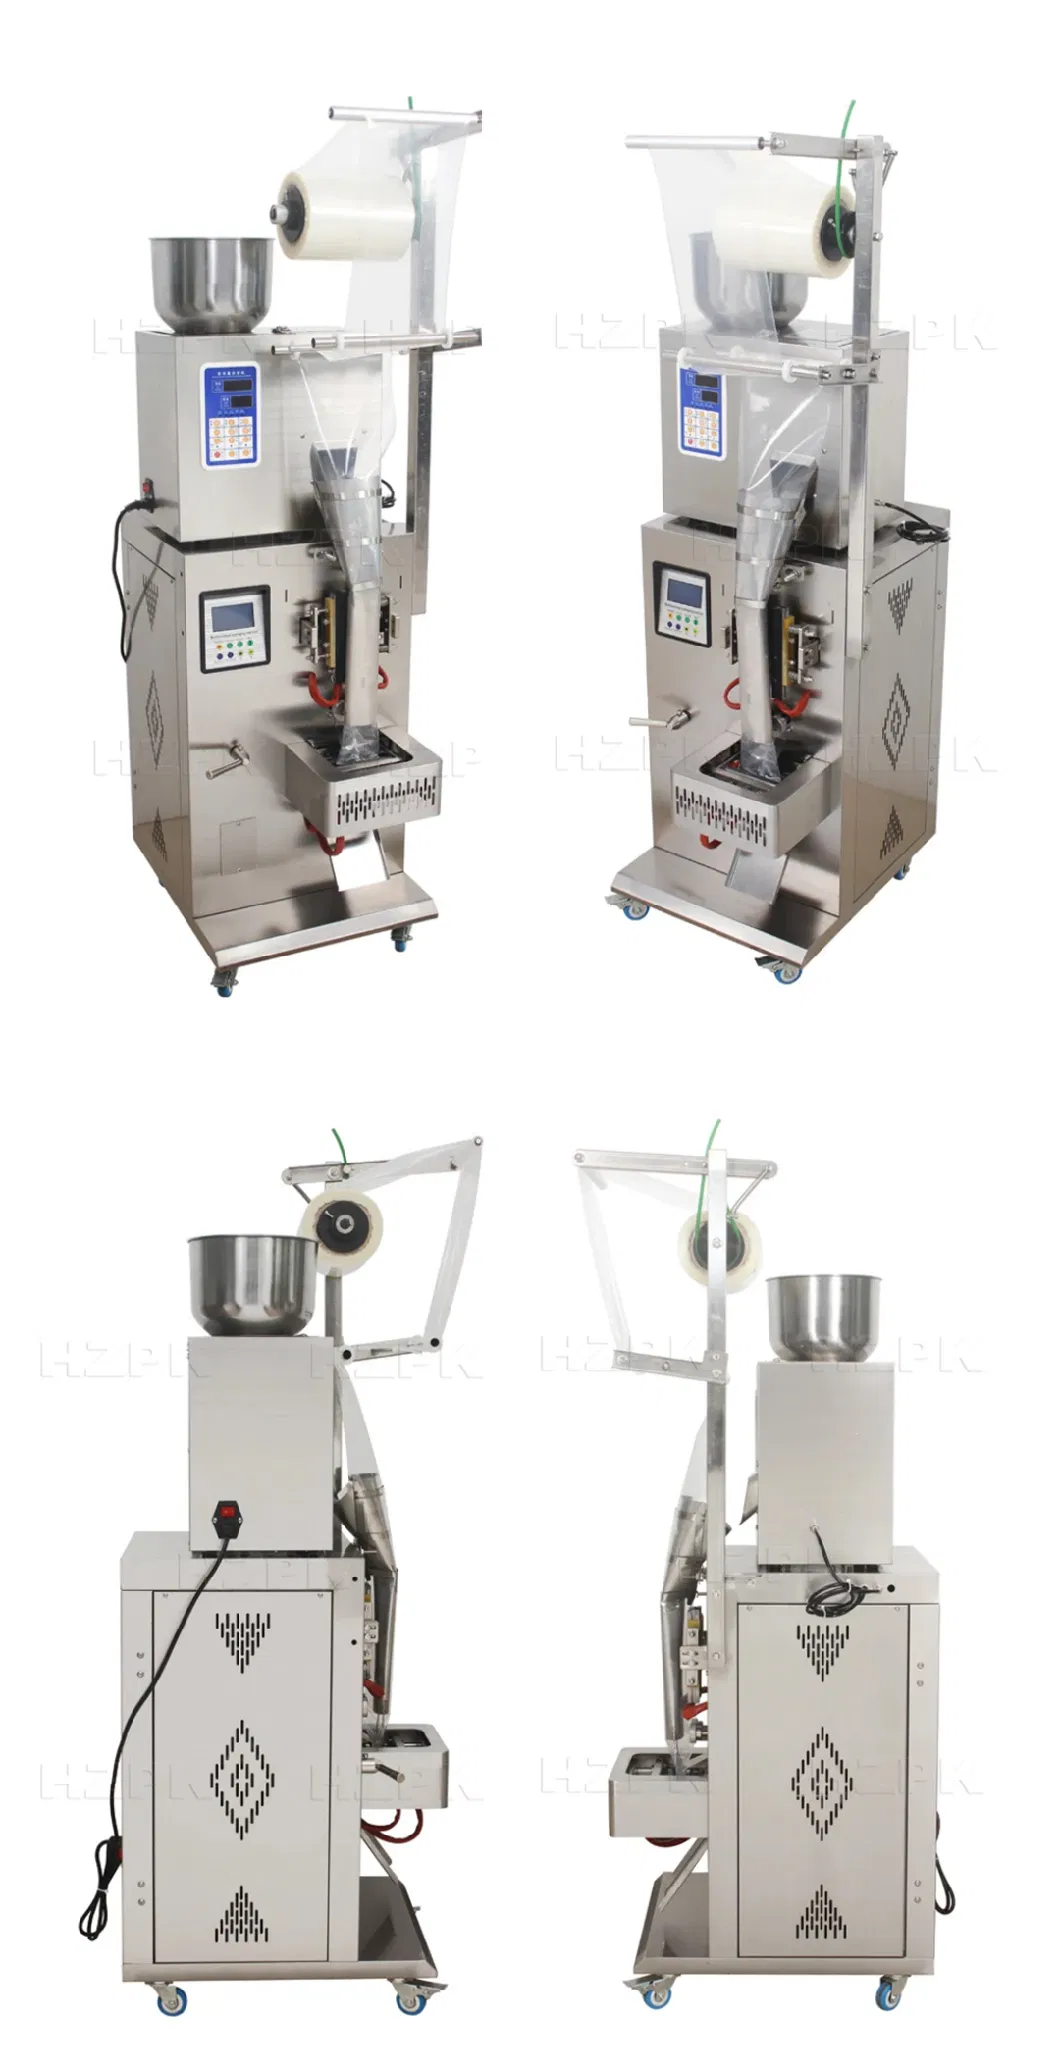 Hzpk Vertical Automatic Small Paper Tea Bag Plastic Food Salt Granule Sachet Multi-Function Weighing and Packaging Machines for Small Business